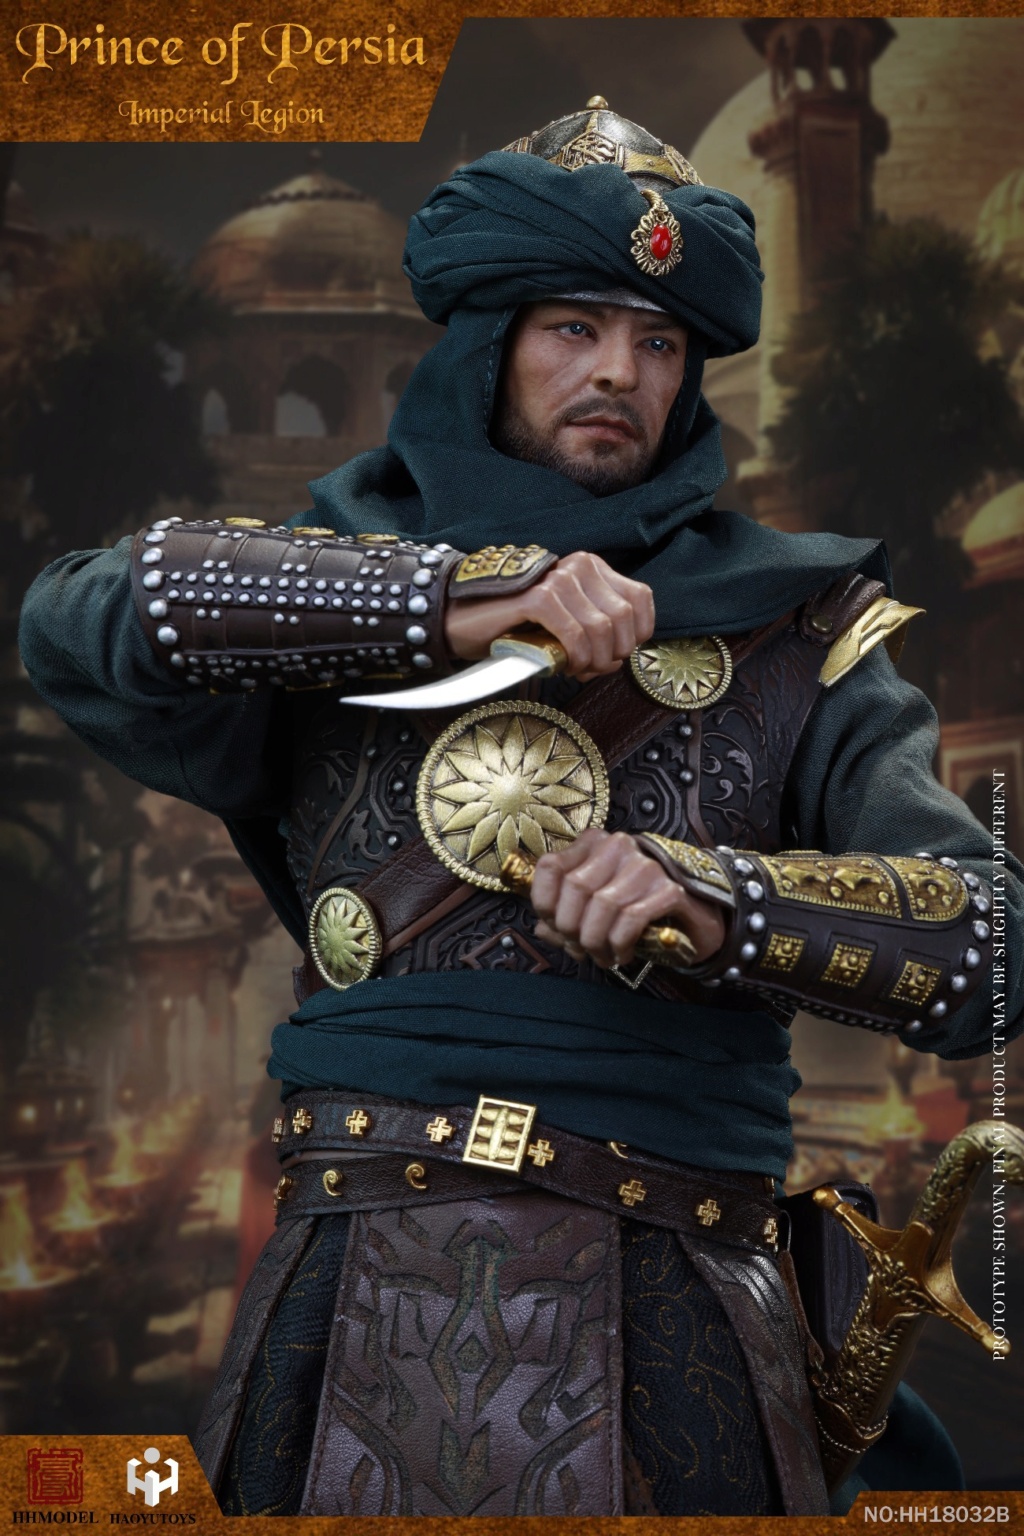 PrinceofPersia - NEW PRODUCT: HHMODEL x HAOYUTOYS 1/6 Imperial Legion-Prince of Persia-A Standard Edition/B Luxury Edition 22400712